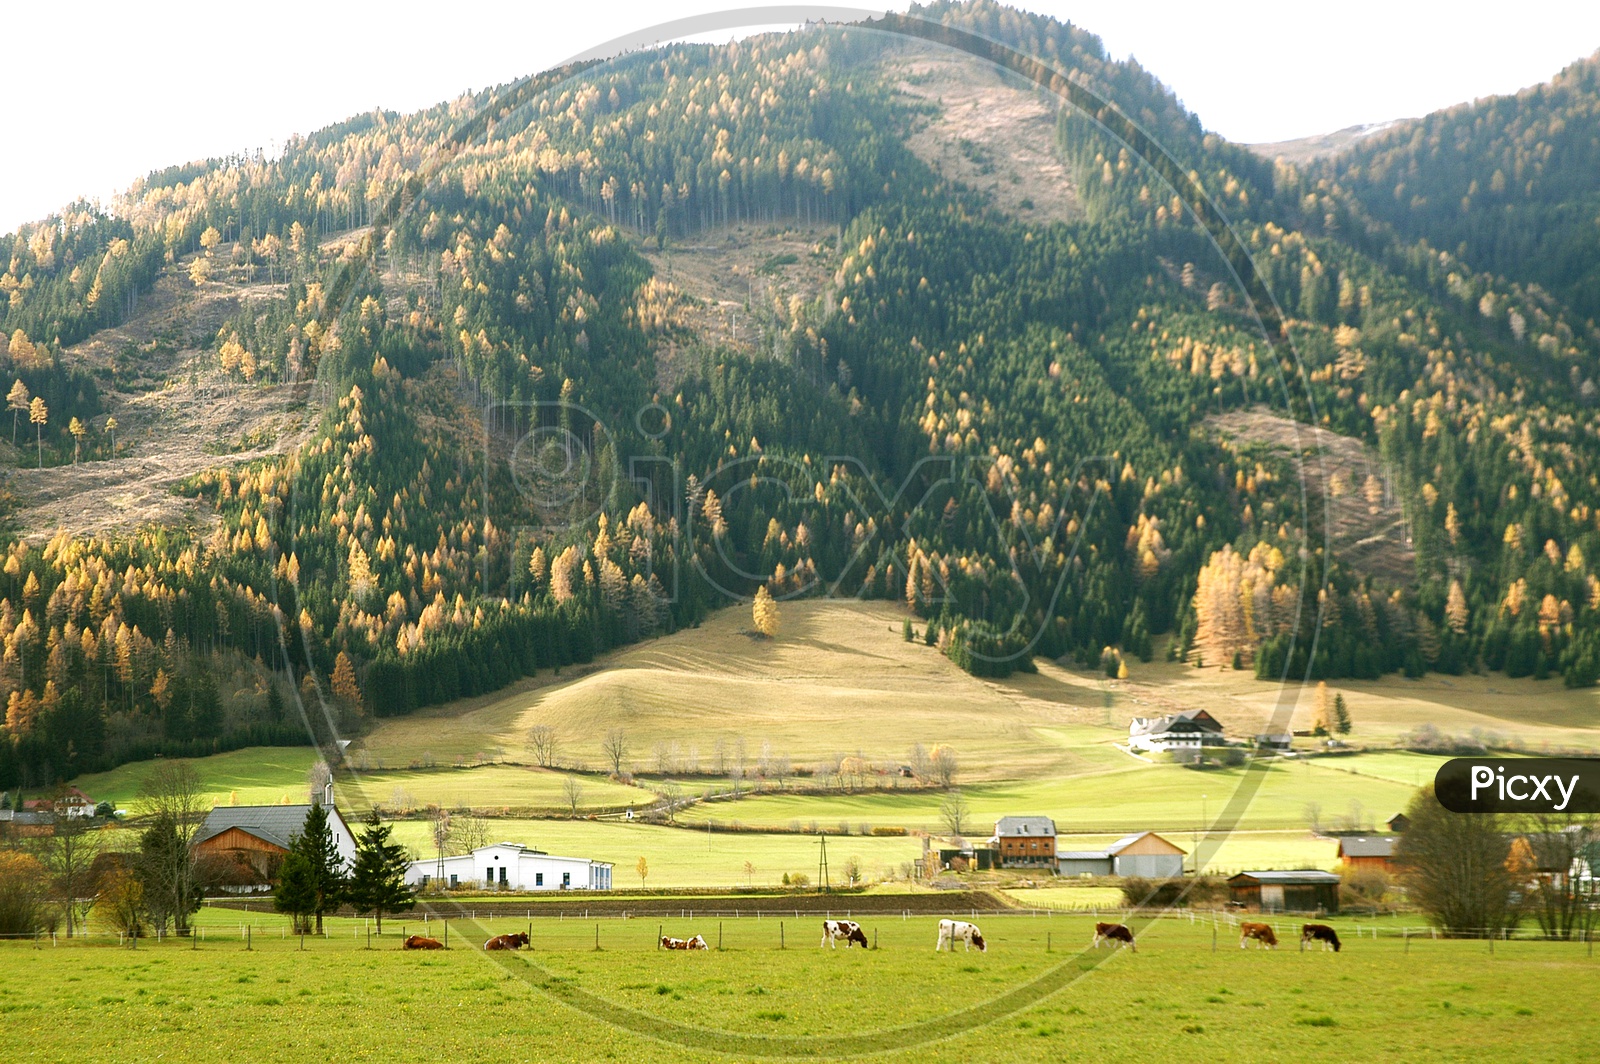 Cattle grazing in the meadows with Swiss Alps in the background